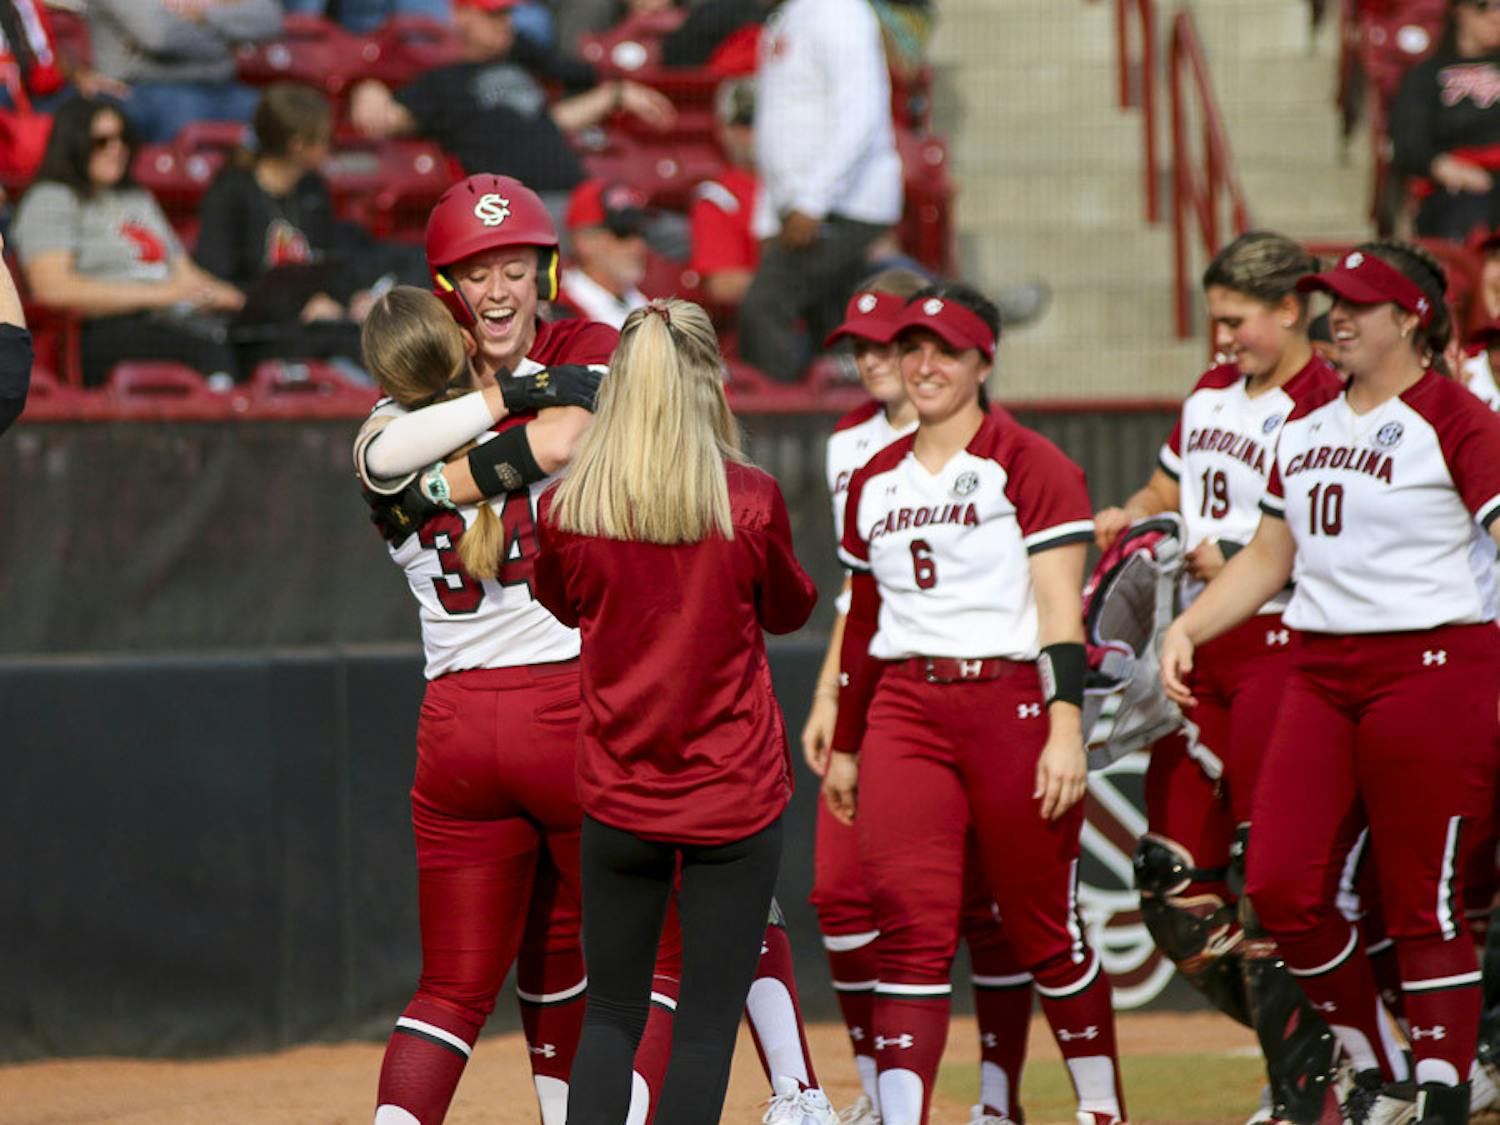 The Gamecock softball team celebrates after fifth-year outfielder Haley Simpson hits a home run during the second inning of the match against Western Kentucky University at Beckham Field on Feb.19, 2023. The Gamecocks defeated the Hilltoppers 11-2.